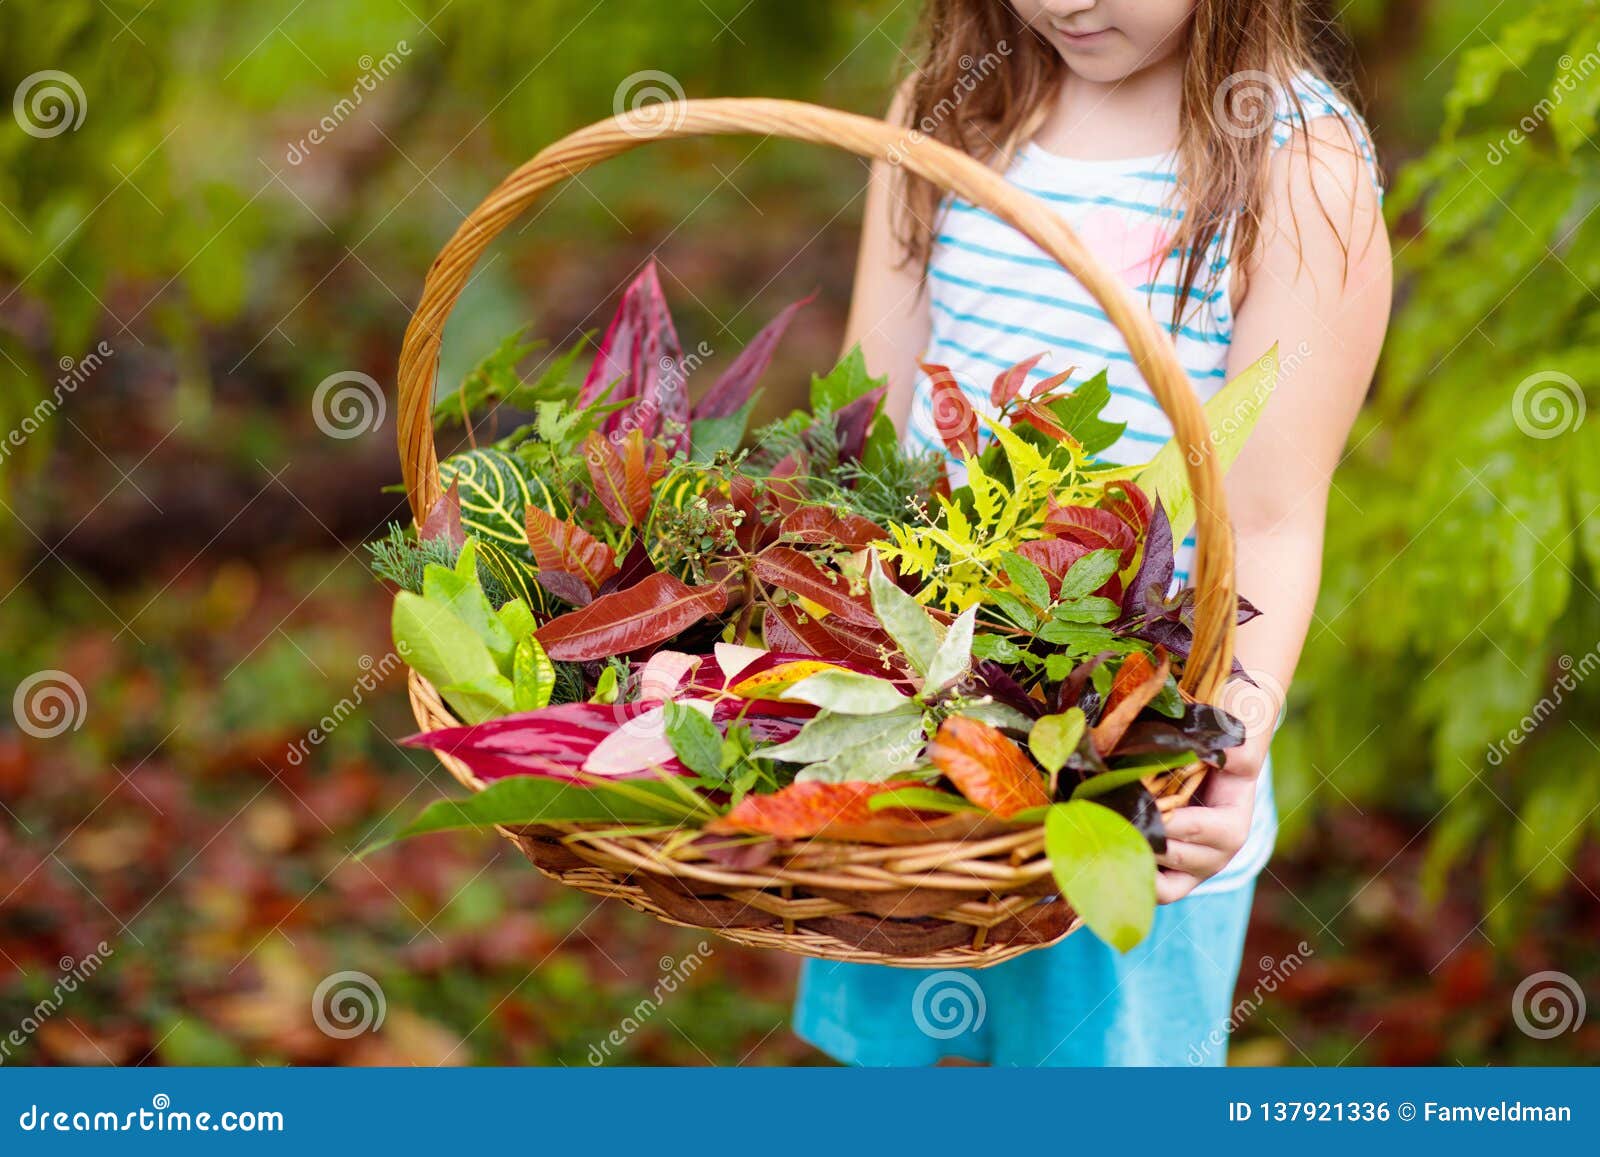 Download Child Picking Colorful Autumn Leaves In Basket Stock Photo ...